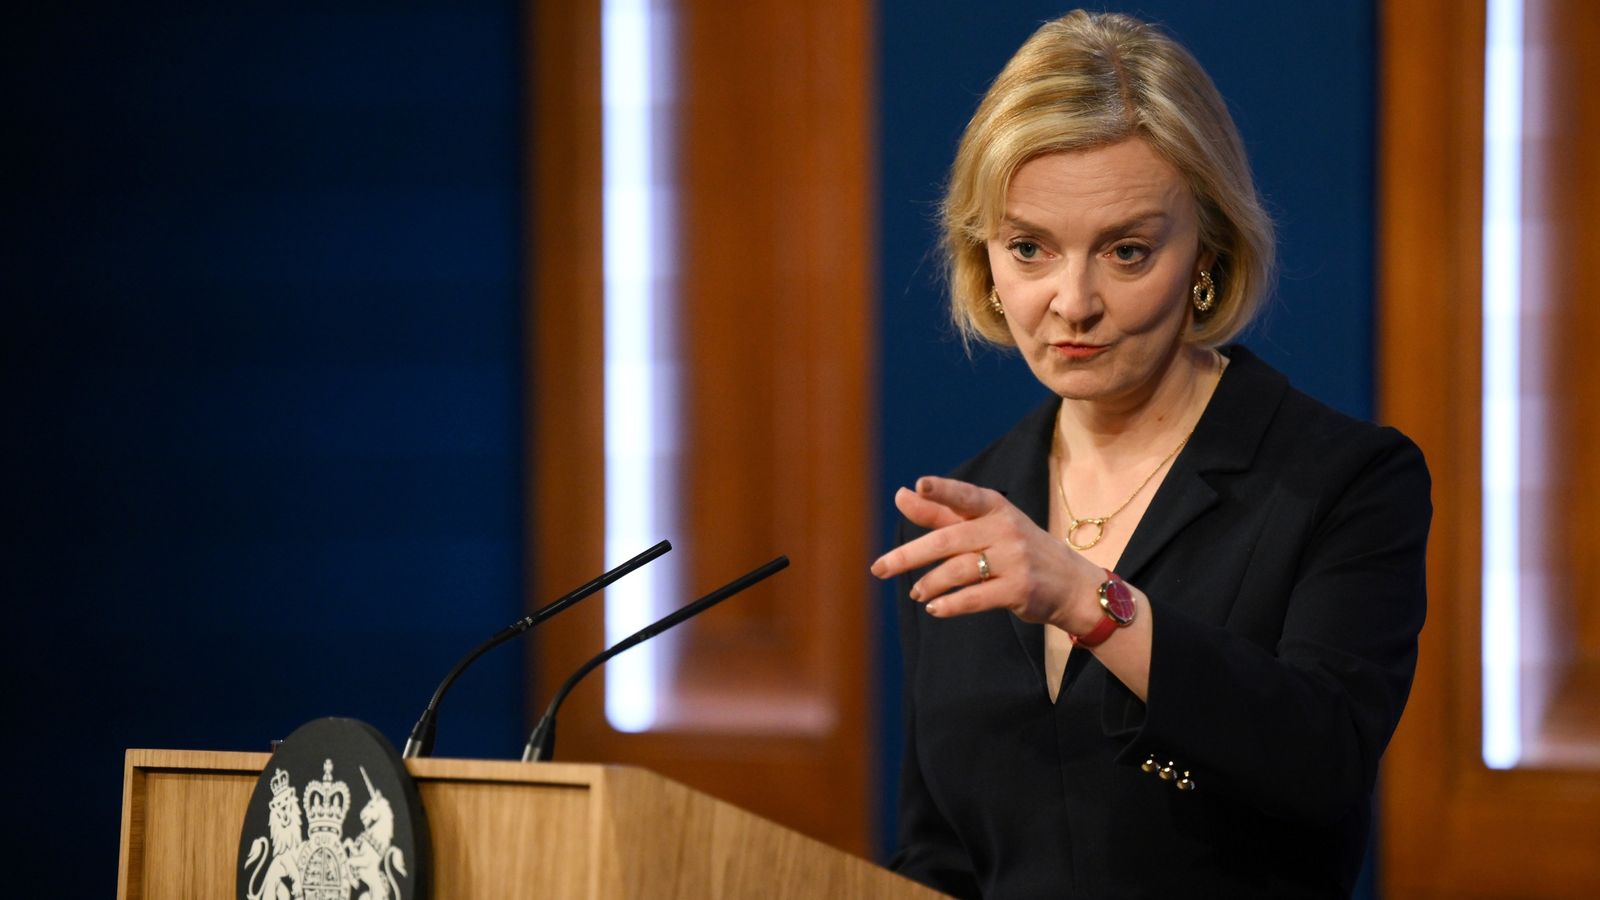 'I want to be honest, this is difficult': Liz Truss confirms U-turn after sacking chancellor Kwasi Kwarteng